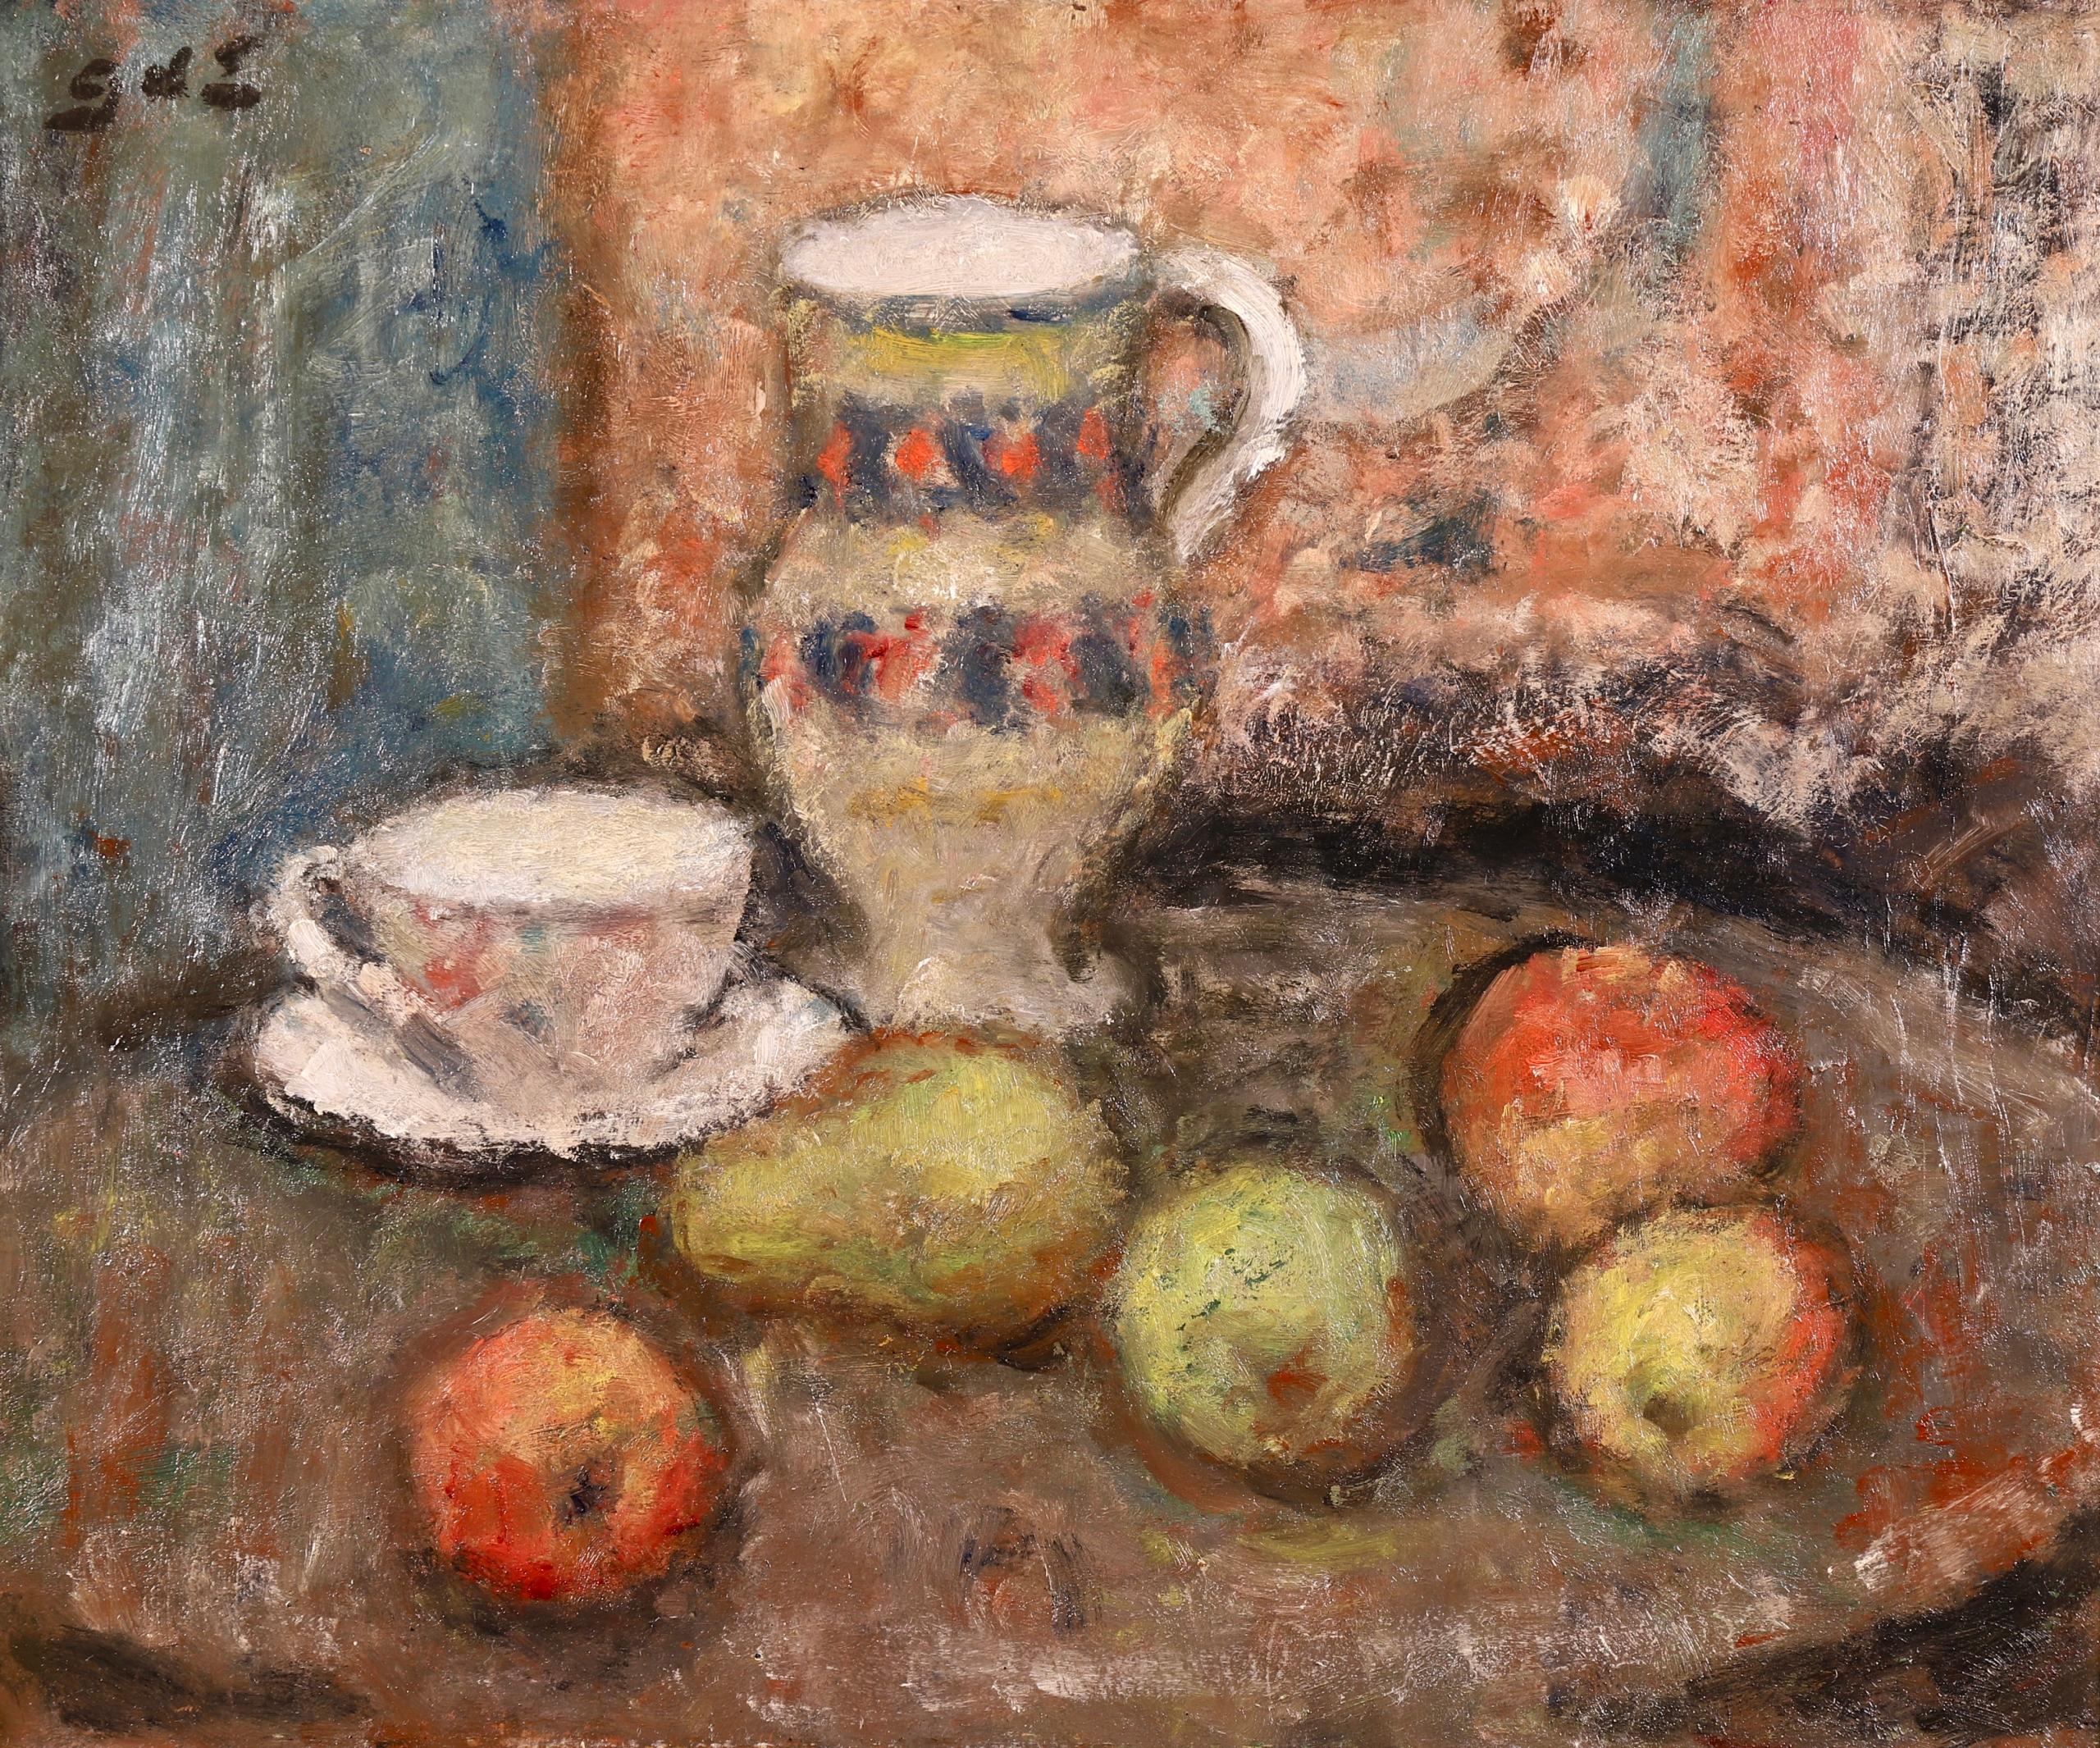 A wonderful oil on panel by French post impressionist painter Georges D'Espagnat. The work depicts a wooden table in an interior with a jug, teacup and saucer and red and green apples and pears placed upon it.

Signature:
Signed upper